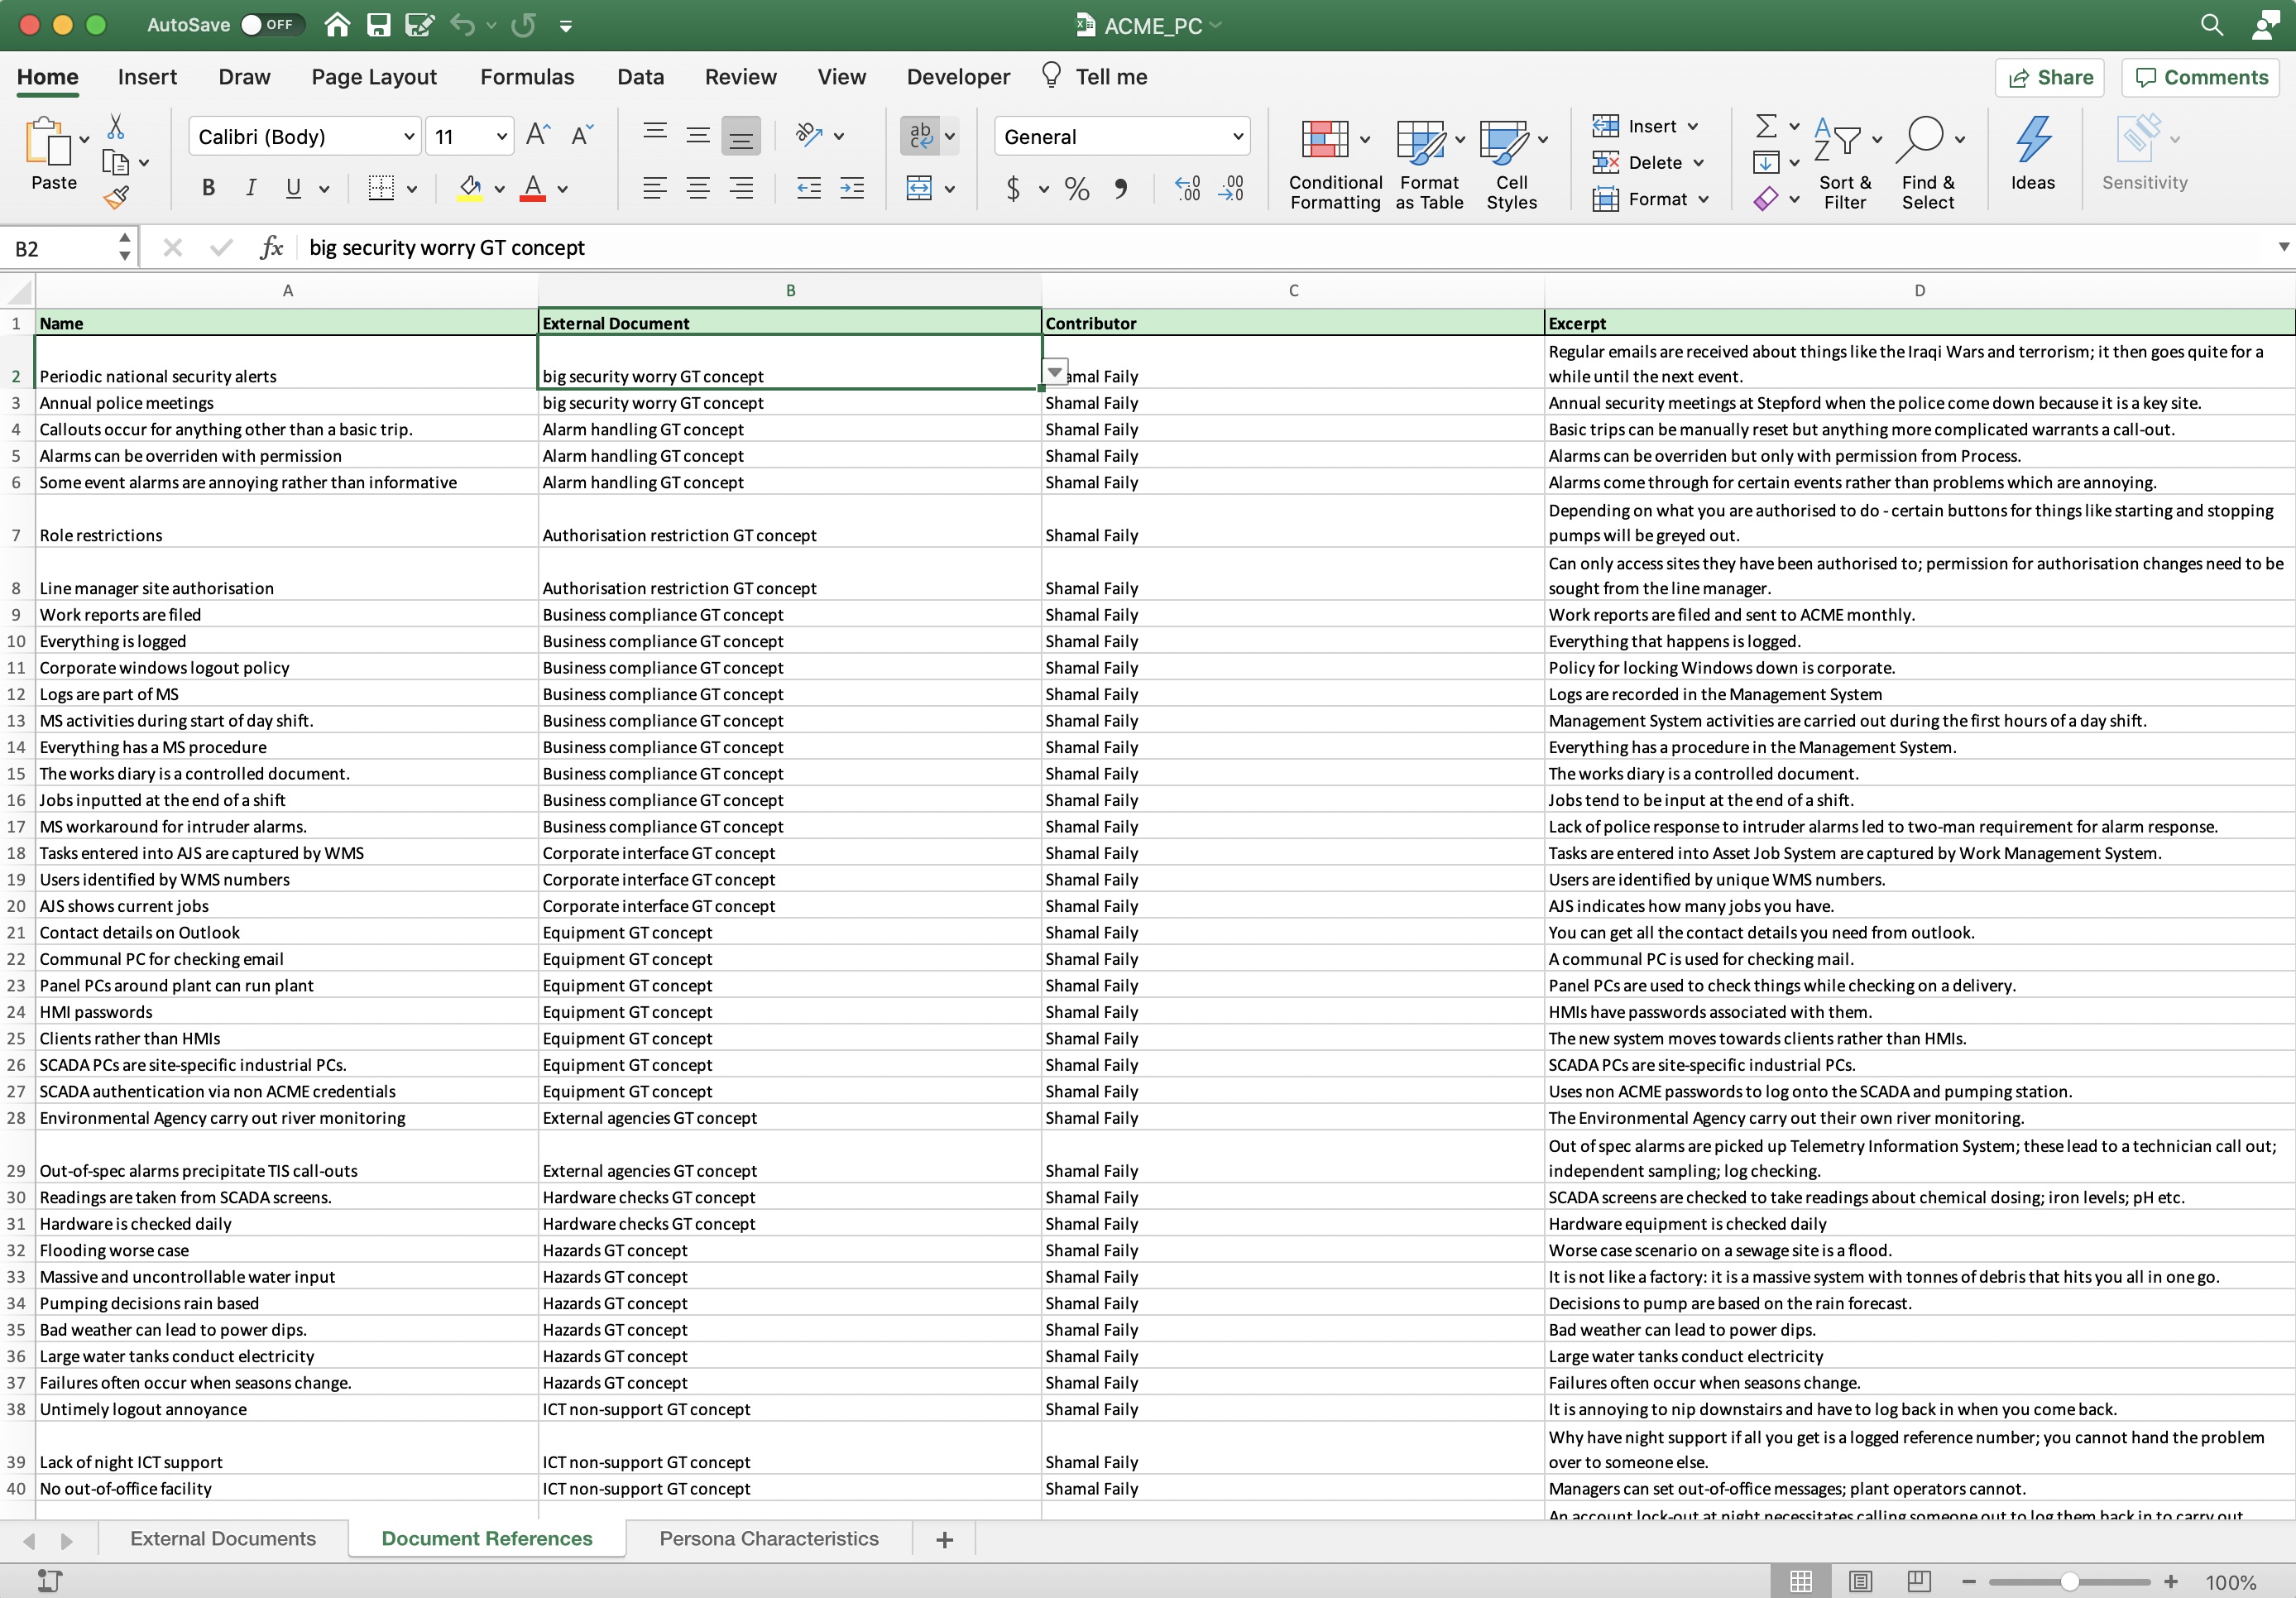 Document references spreadsheet